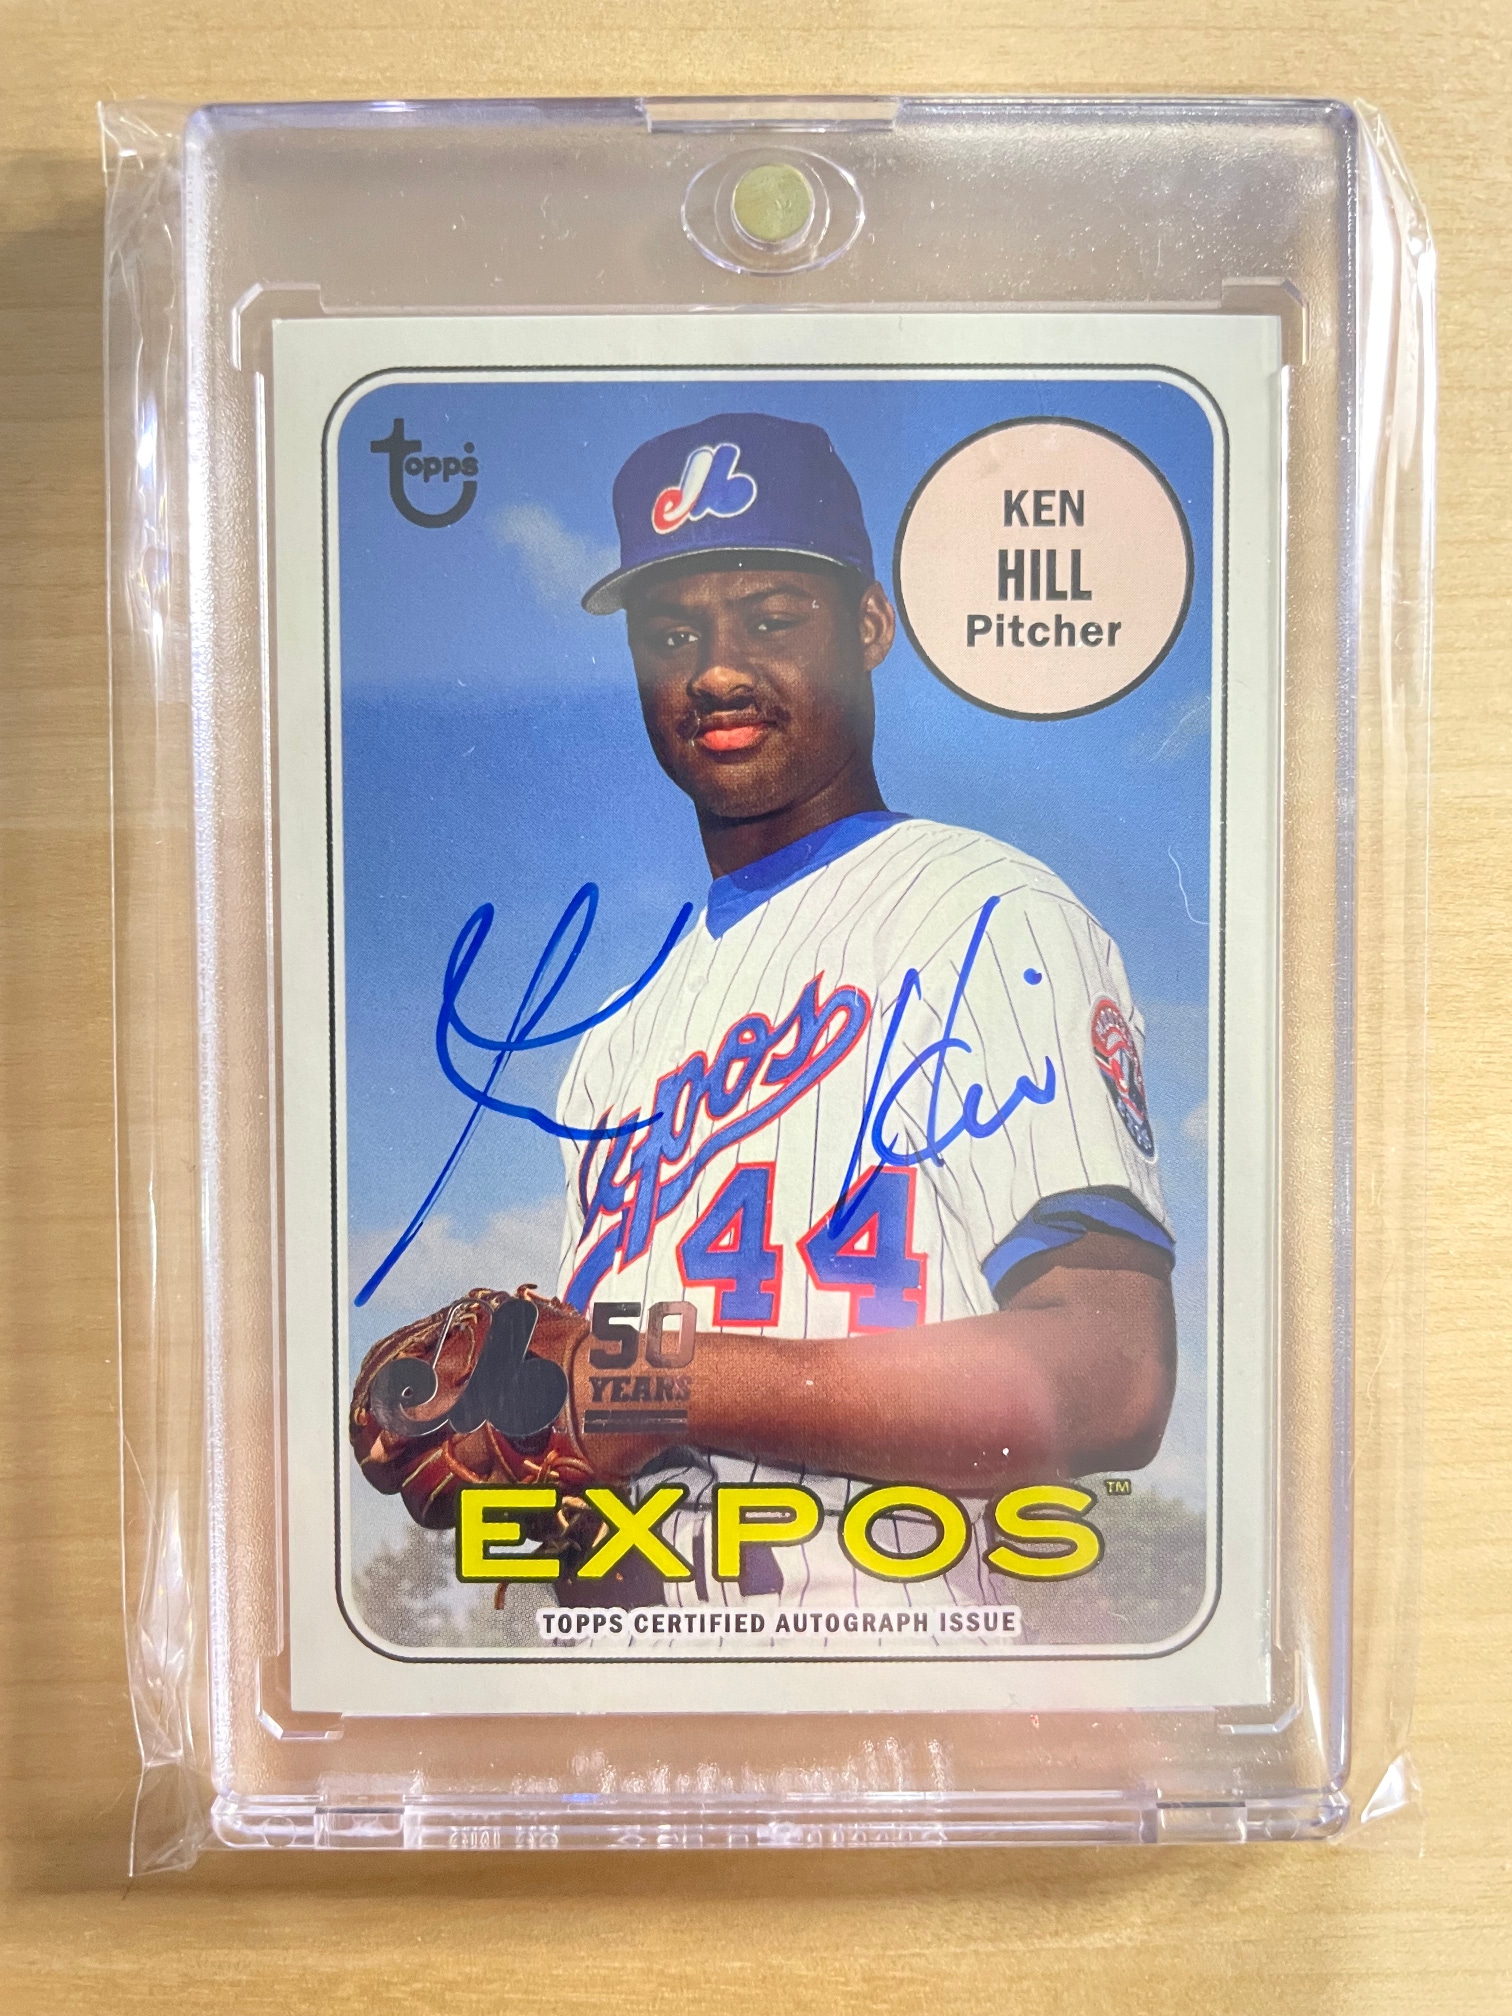 2019 Topps Montreal Expos 50th - Ken Hill autographed card